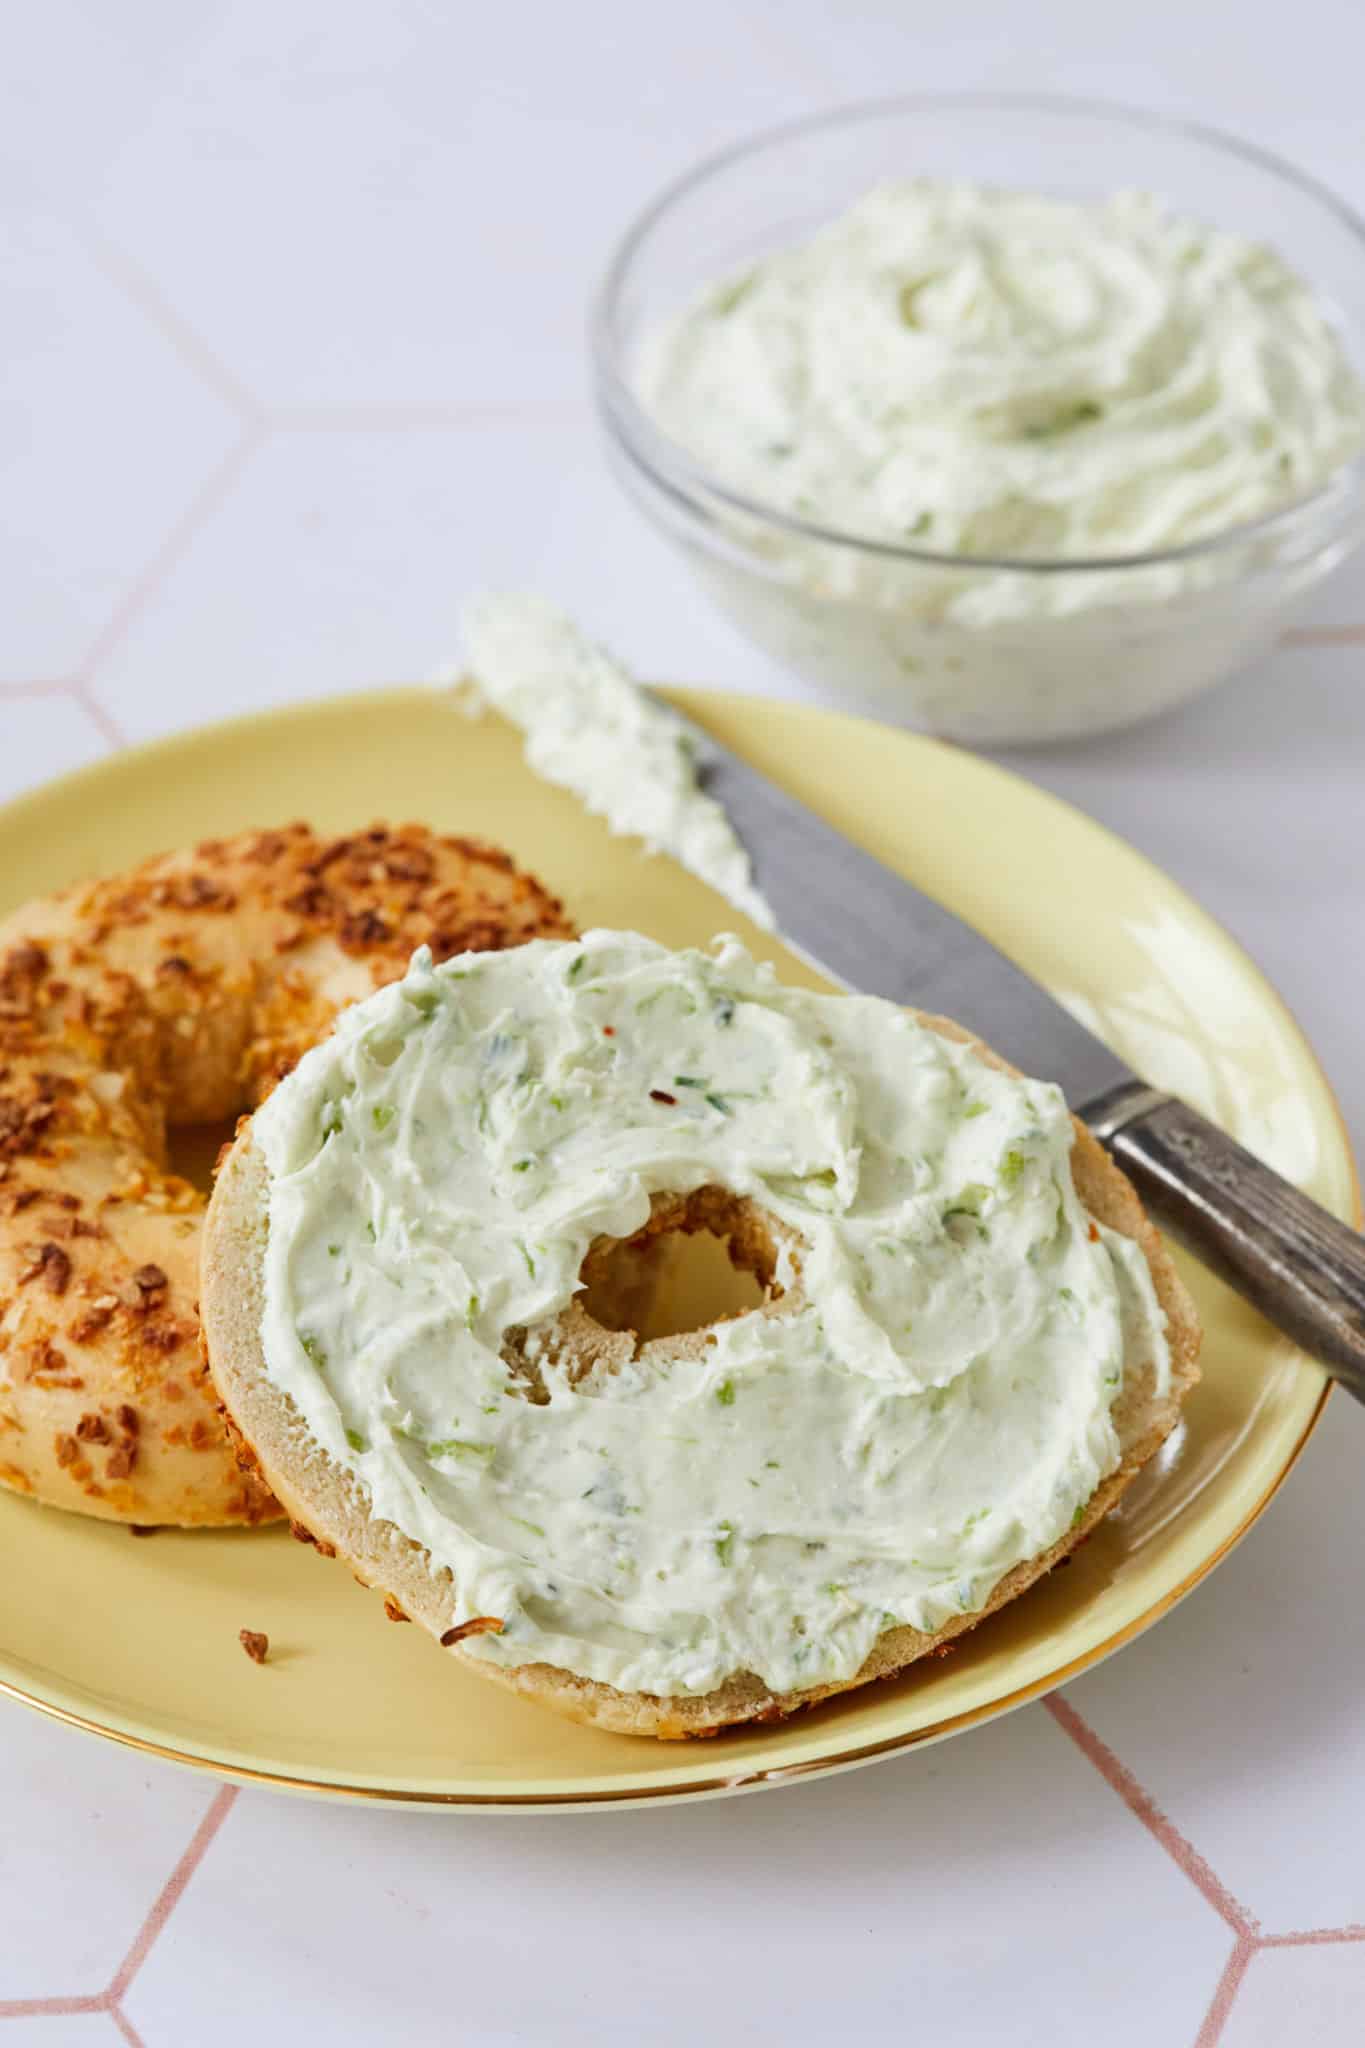 A close-up photo of the flavored cream cheese on the bagel. You can see the green of the chives.